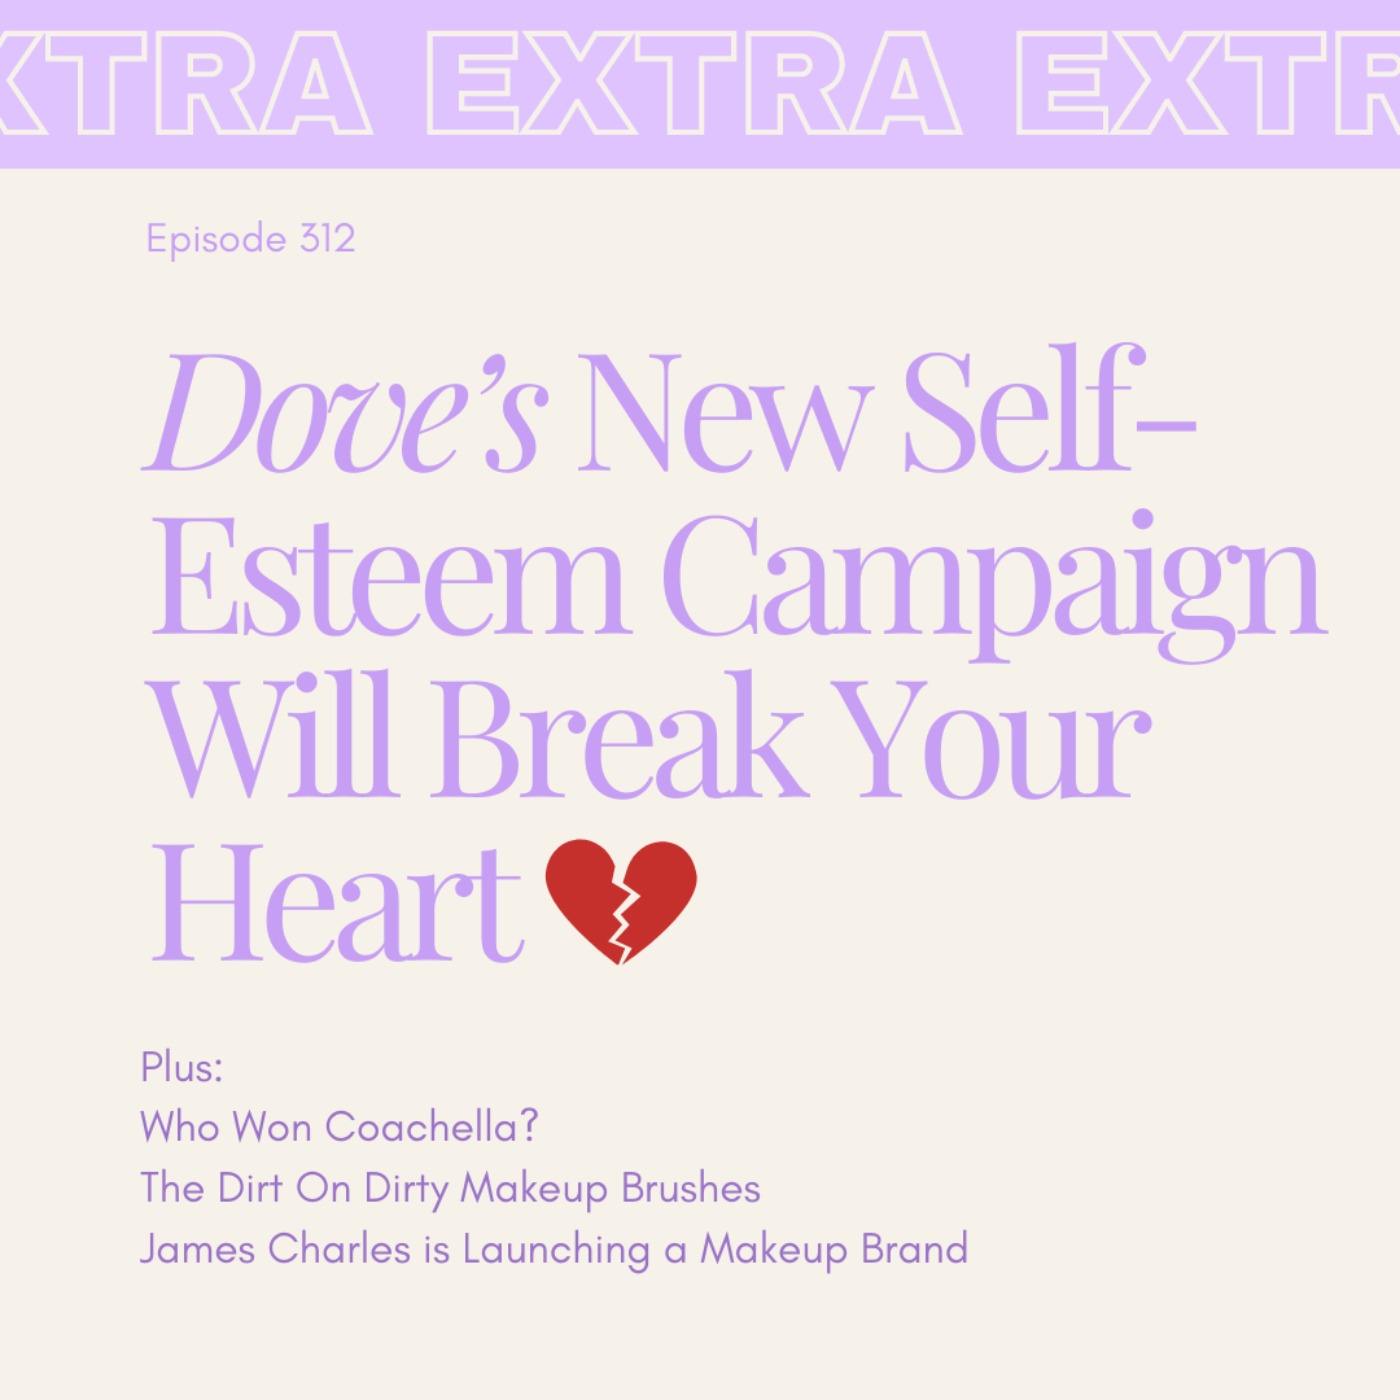 Social Media is Poisoning Our Youth and Dove's Emotional Campaign Wants to Change That